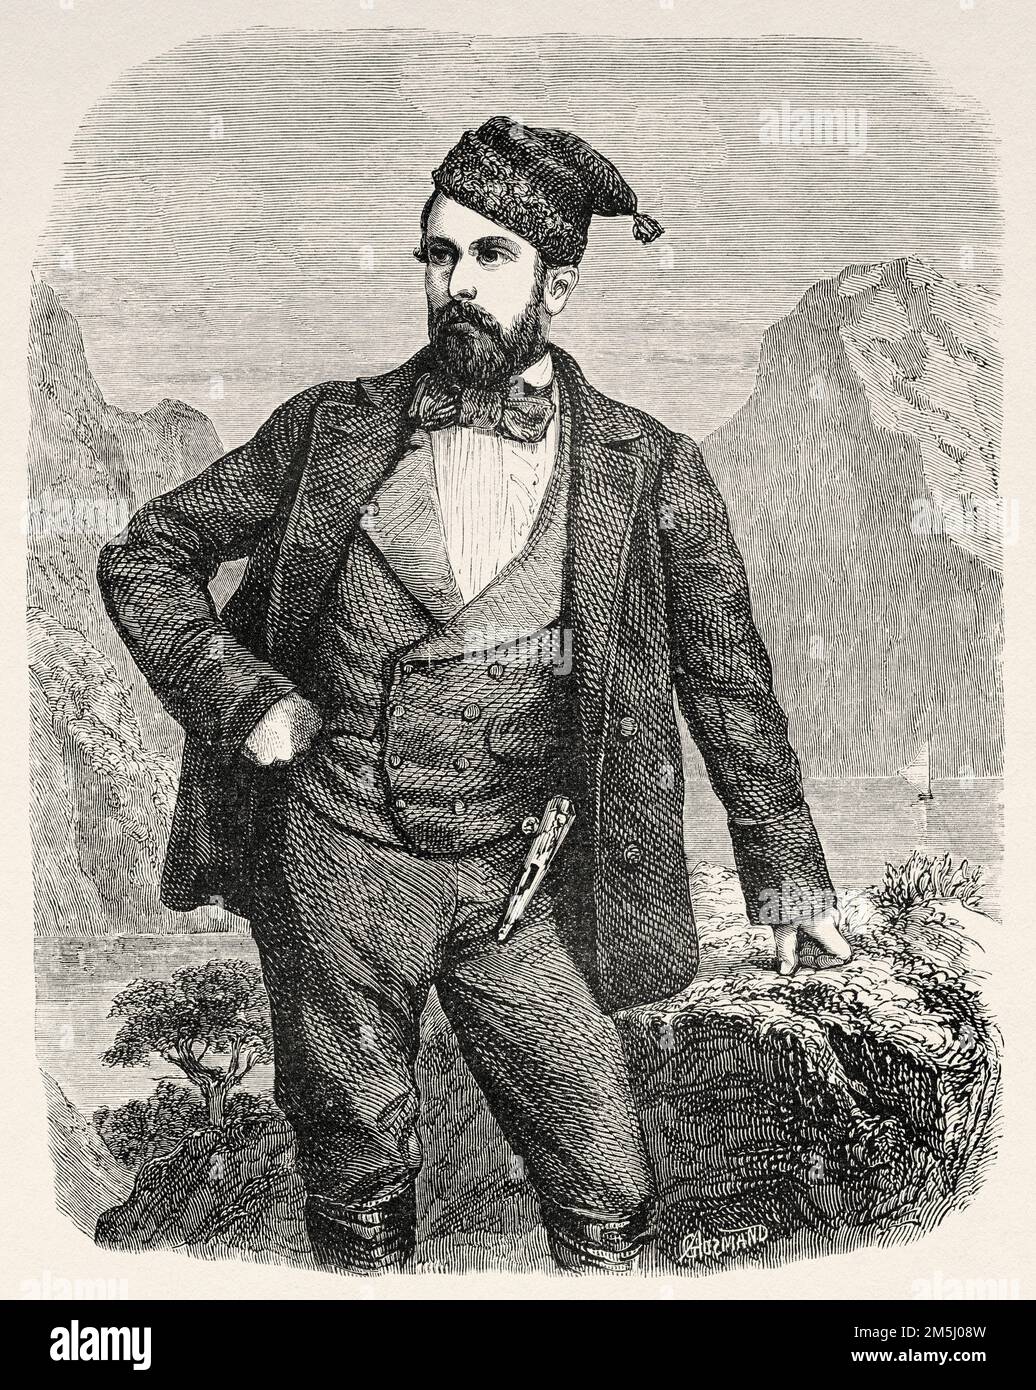 Portrait of Prince Royal of Sweden, Charles XV in traveling costume. Carl Ludvig Eugen. Charles XV in Swedish Karl XV and in Norwegian Karl IV (1826-1872) was King of Sweden and Norway. Scandinavia, Northern Europe. Travels in the Scandinavian States by Saint-Blaise 1856 Stock Photo